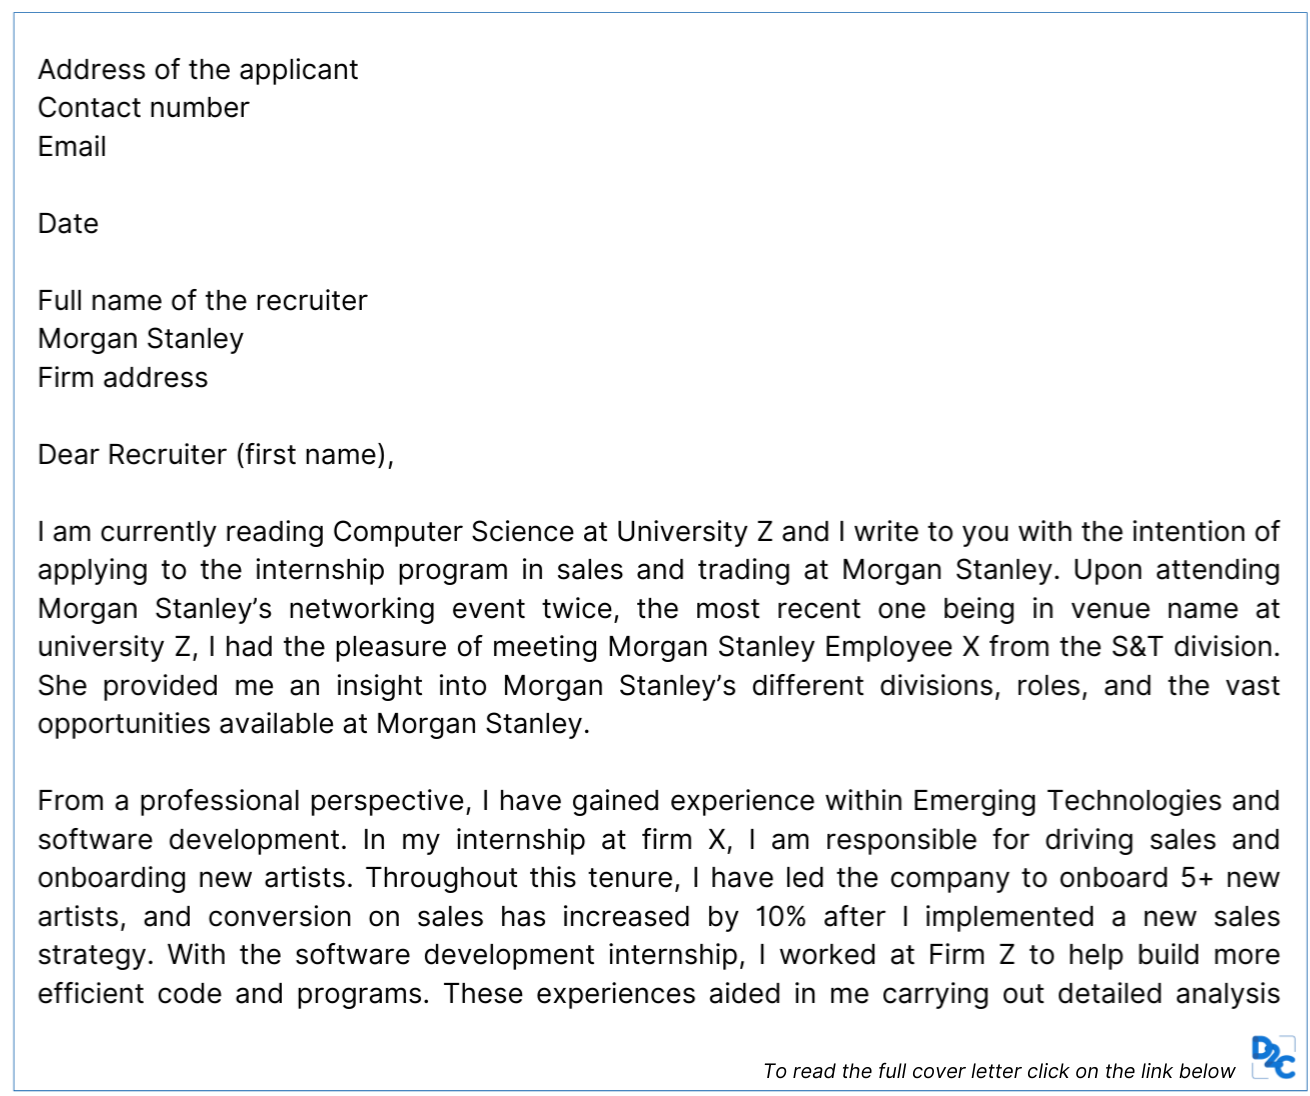 how to write a cover letter for morgan stanley